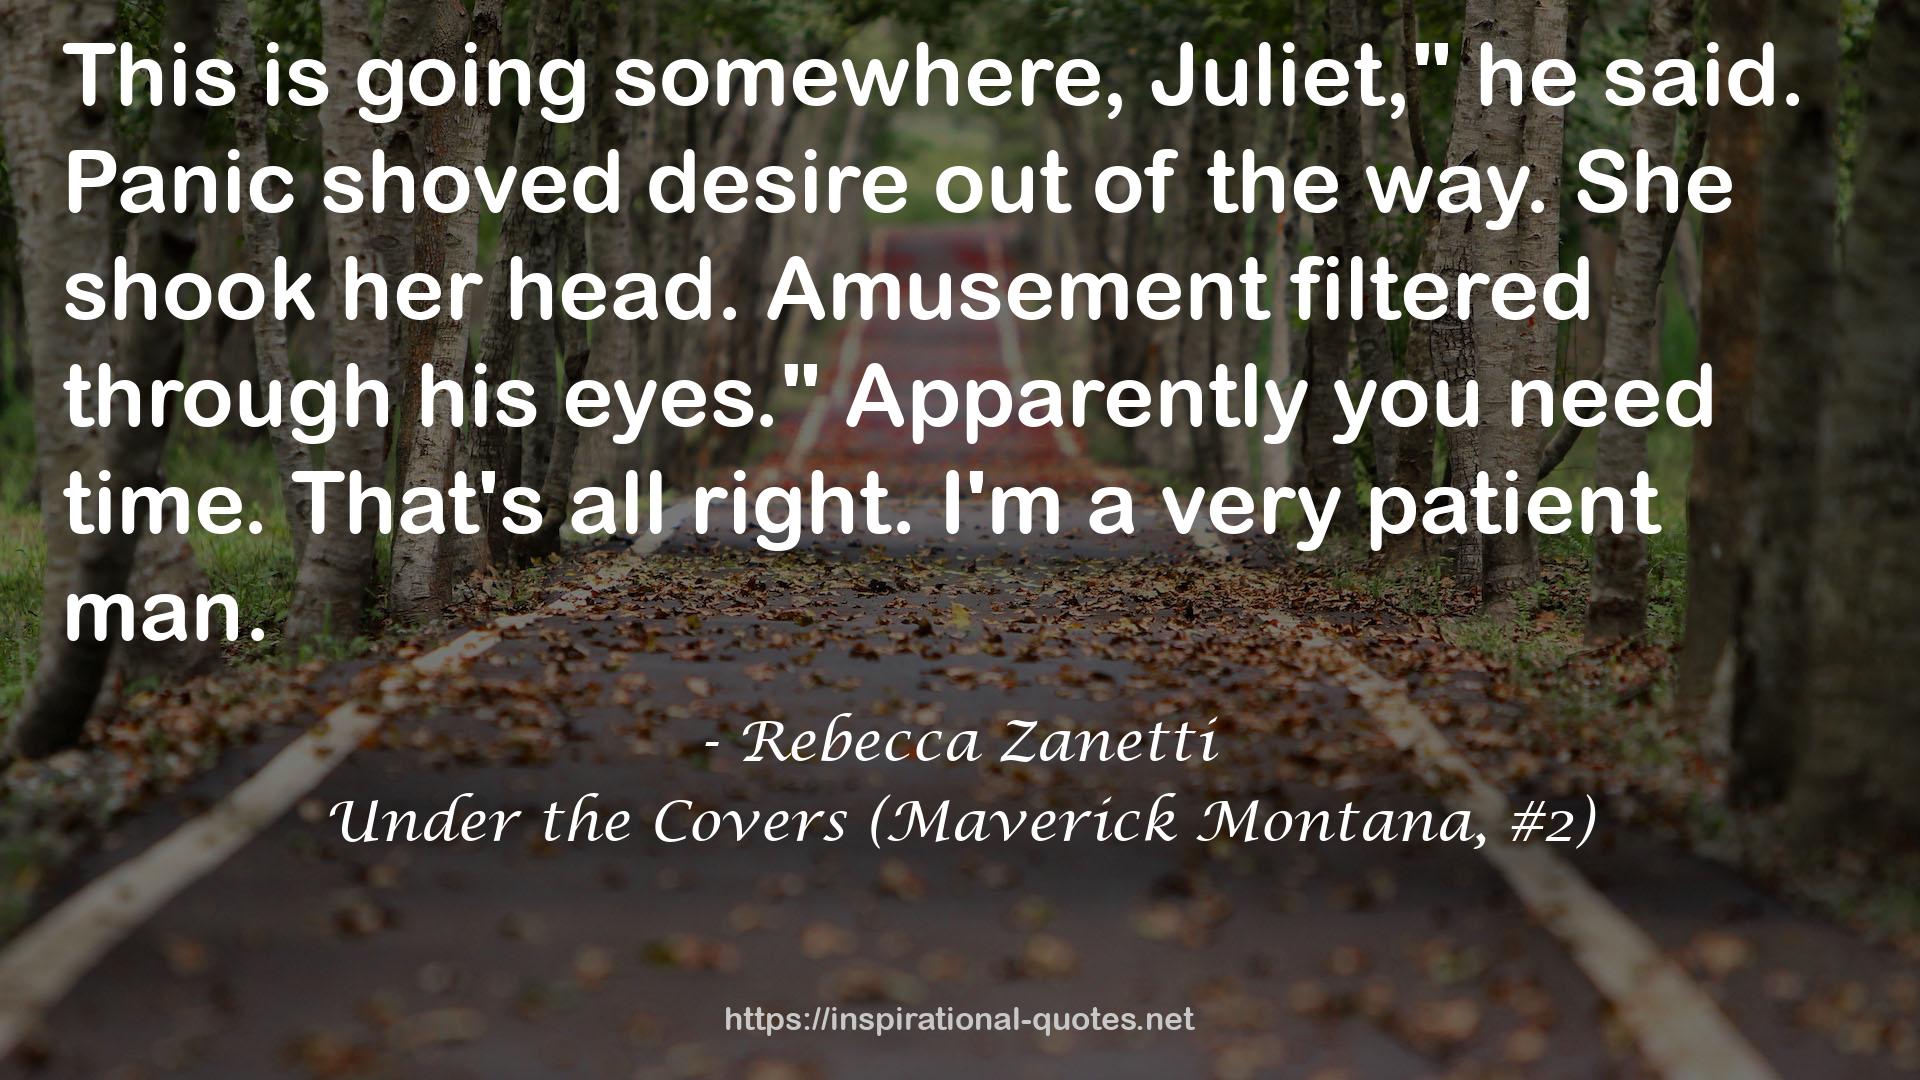 Under the Covers (Maverick Montana, #2) QUOTES